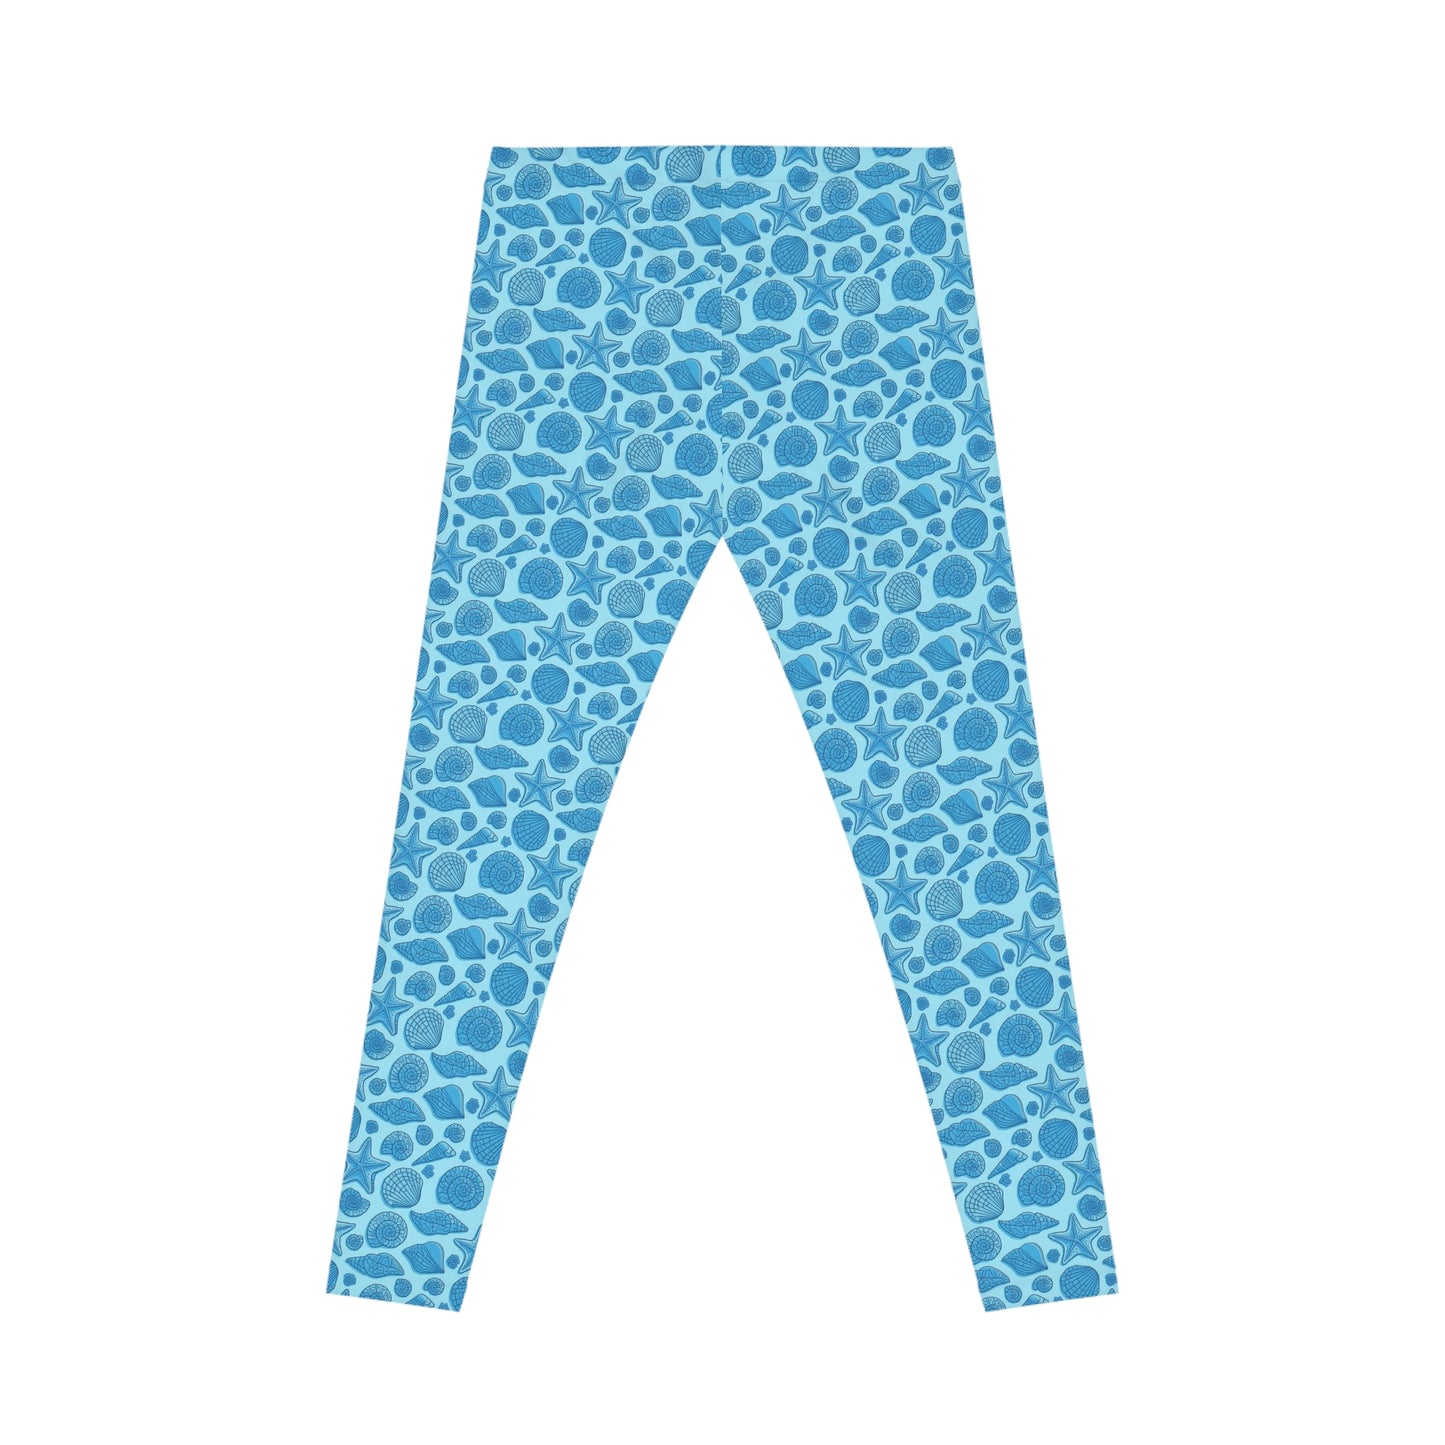 Low Waist Mermaid Dreams Leggings - Blue with Starfish and Seashell Print - Women's Casual Wear, Gym, Yoga, Workout, Beach, Party Pants